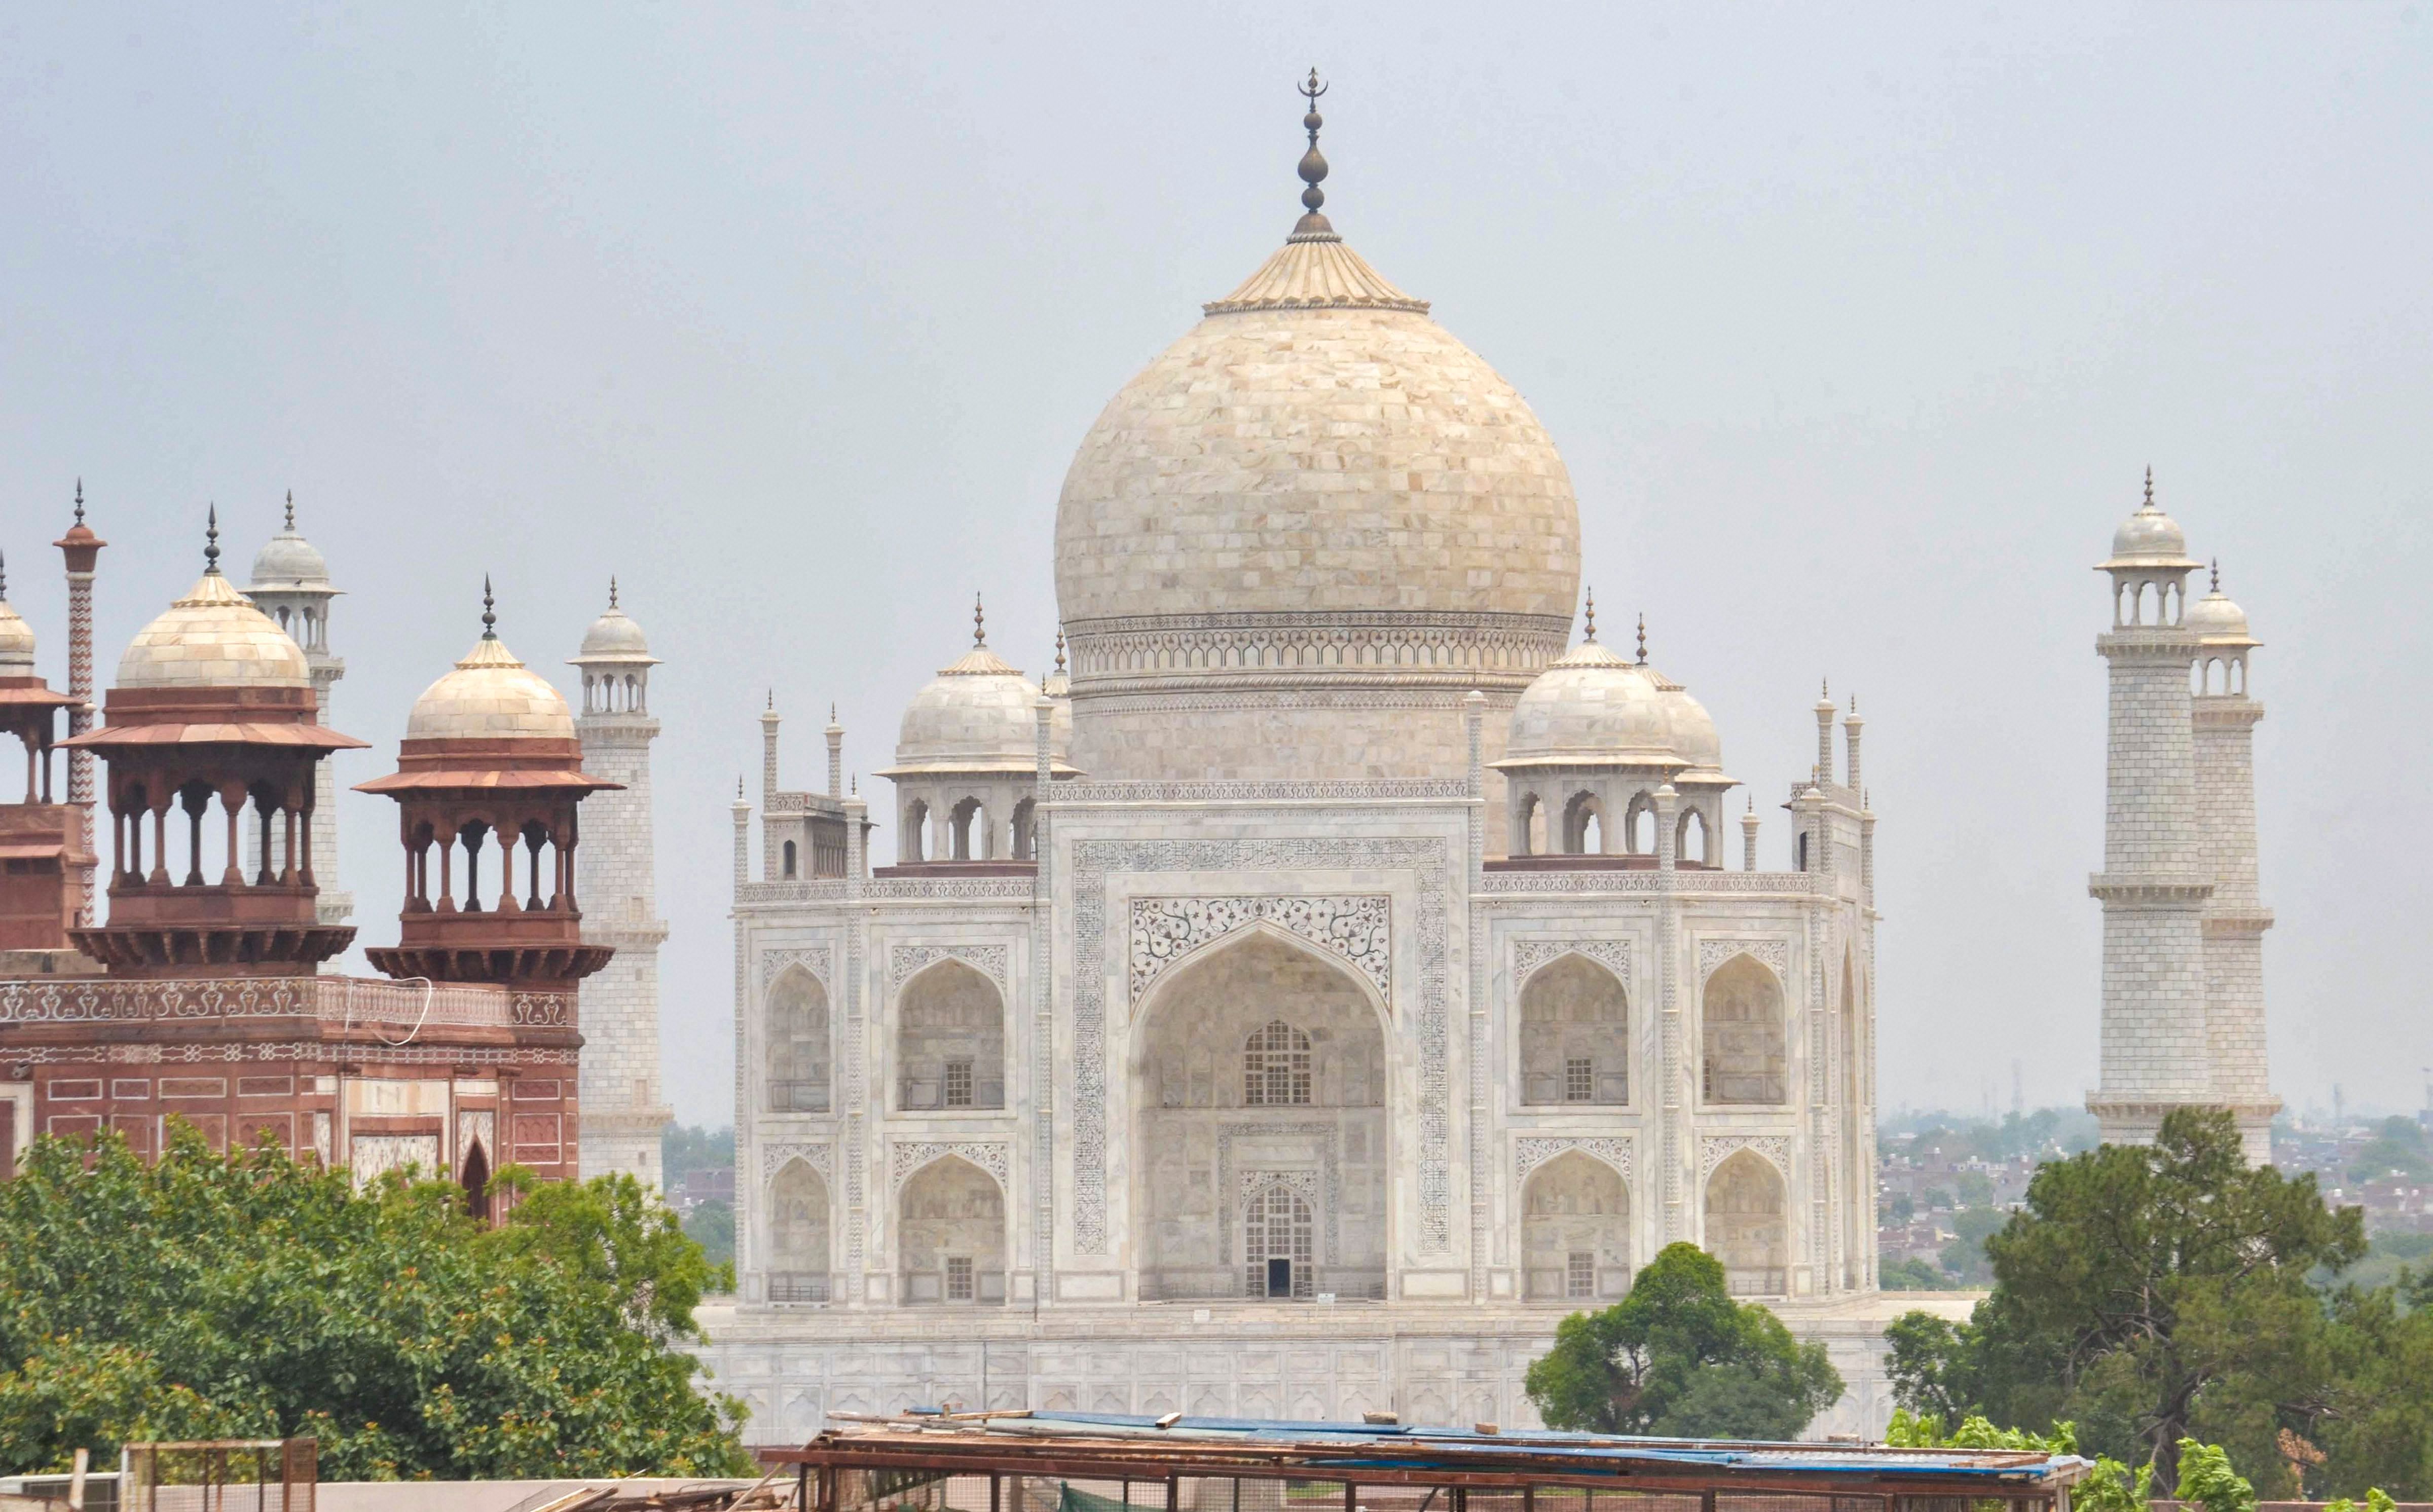 The Agra district administration has decided not to reopen the Taj Mahal for visitors amid concern over rising COVID-19 cases in the city, Credit: PTI